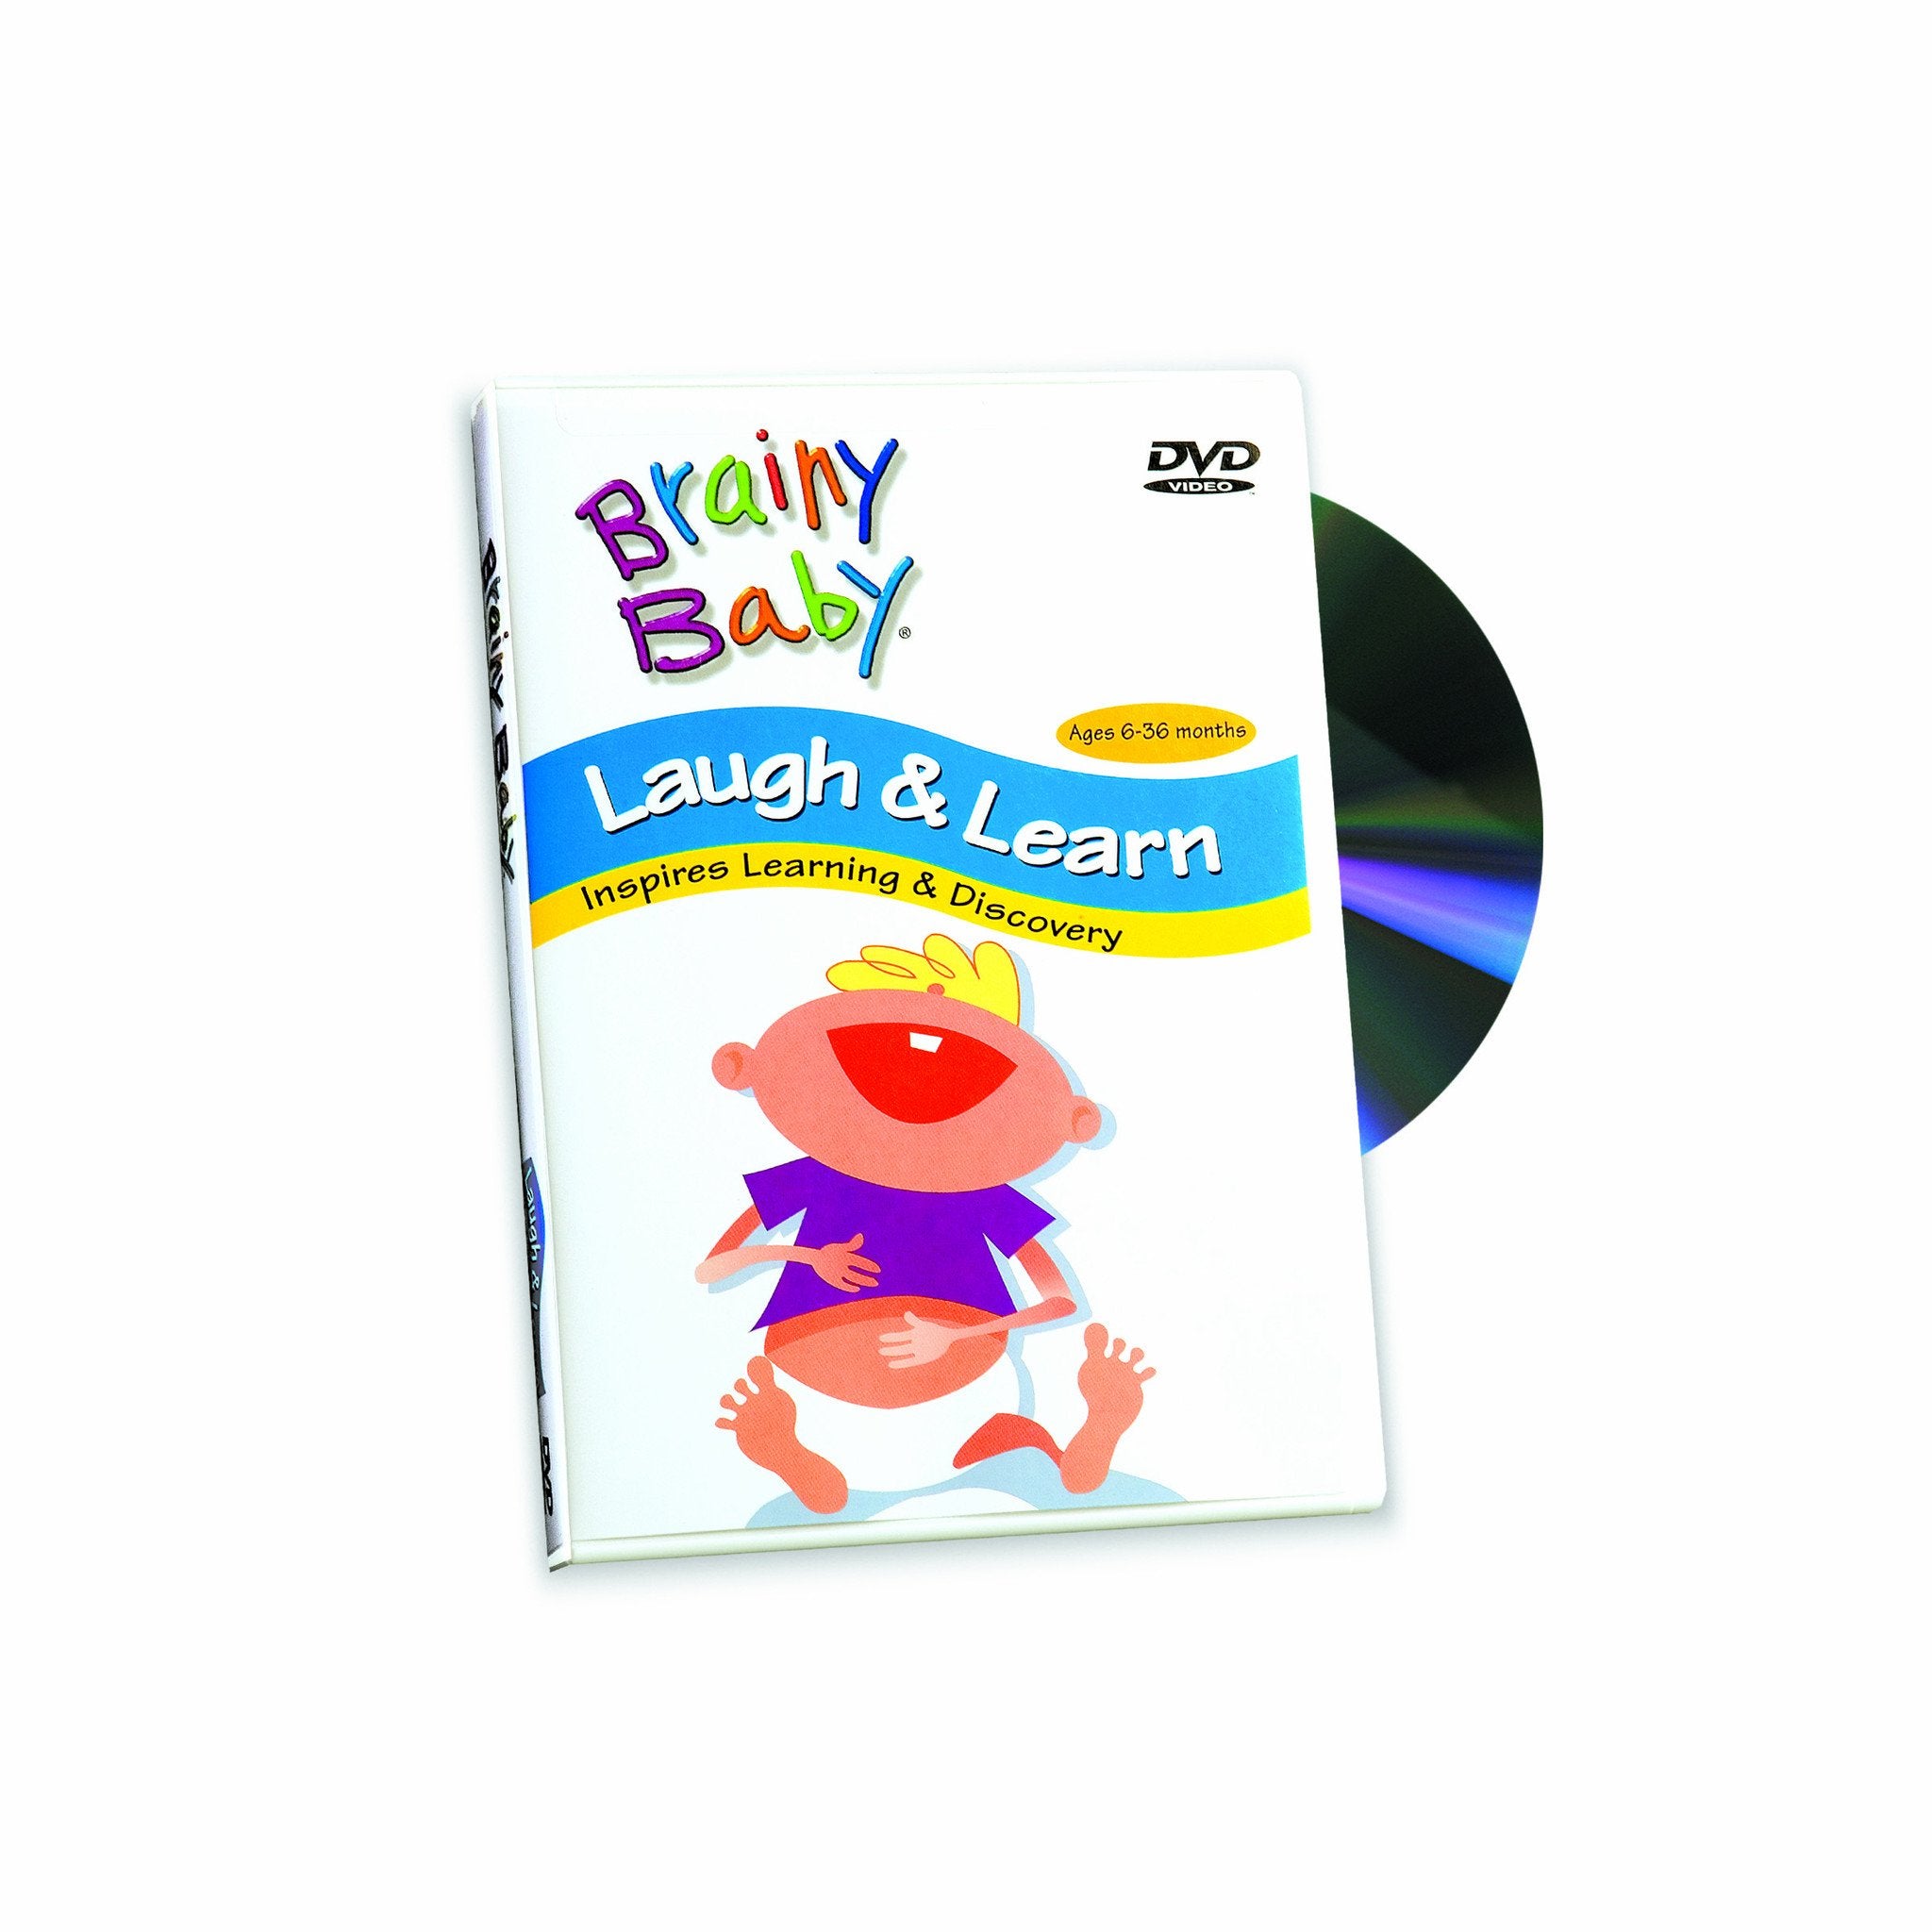 Brainy Baby® Laugh & Learn DVD Classic Edition